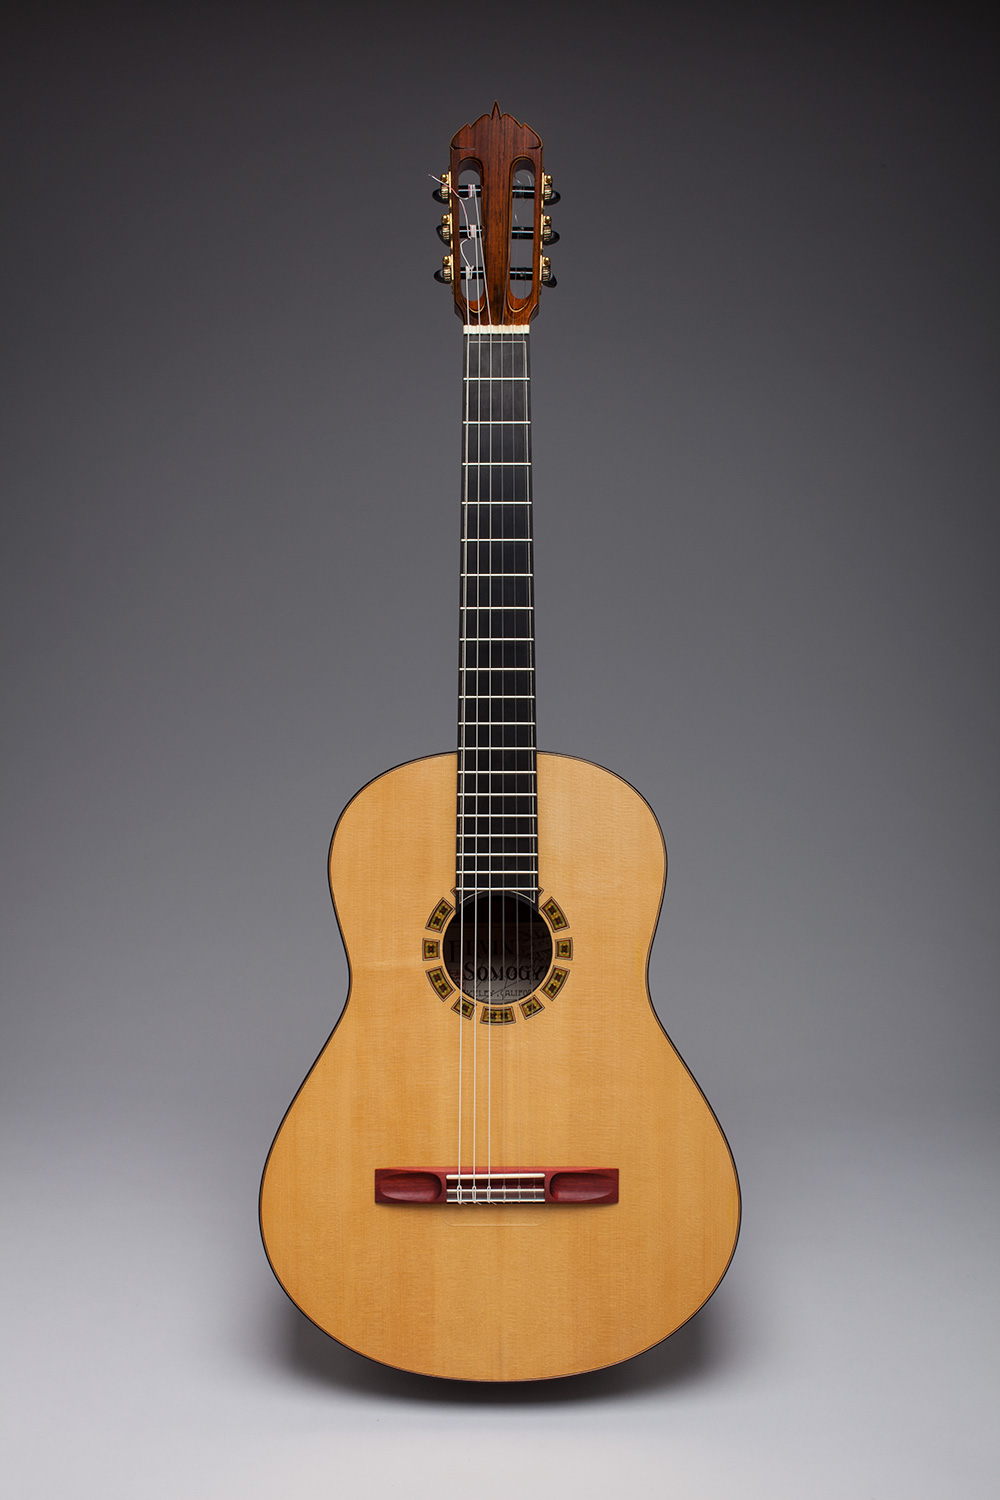 Guitar Models Ervin Somogyi He has been in the ranks of american lutherie since before it is official beginning in 1972. guitar models ervin somogyi